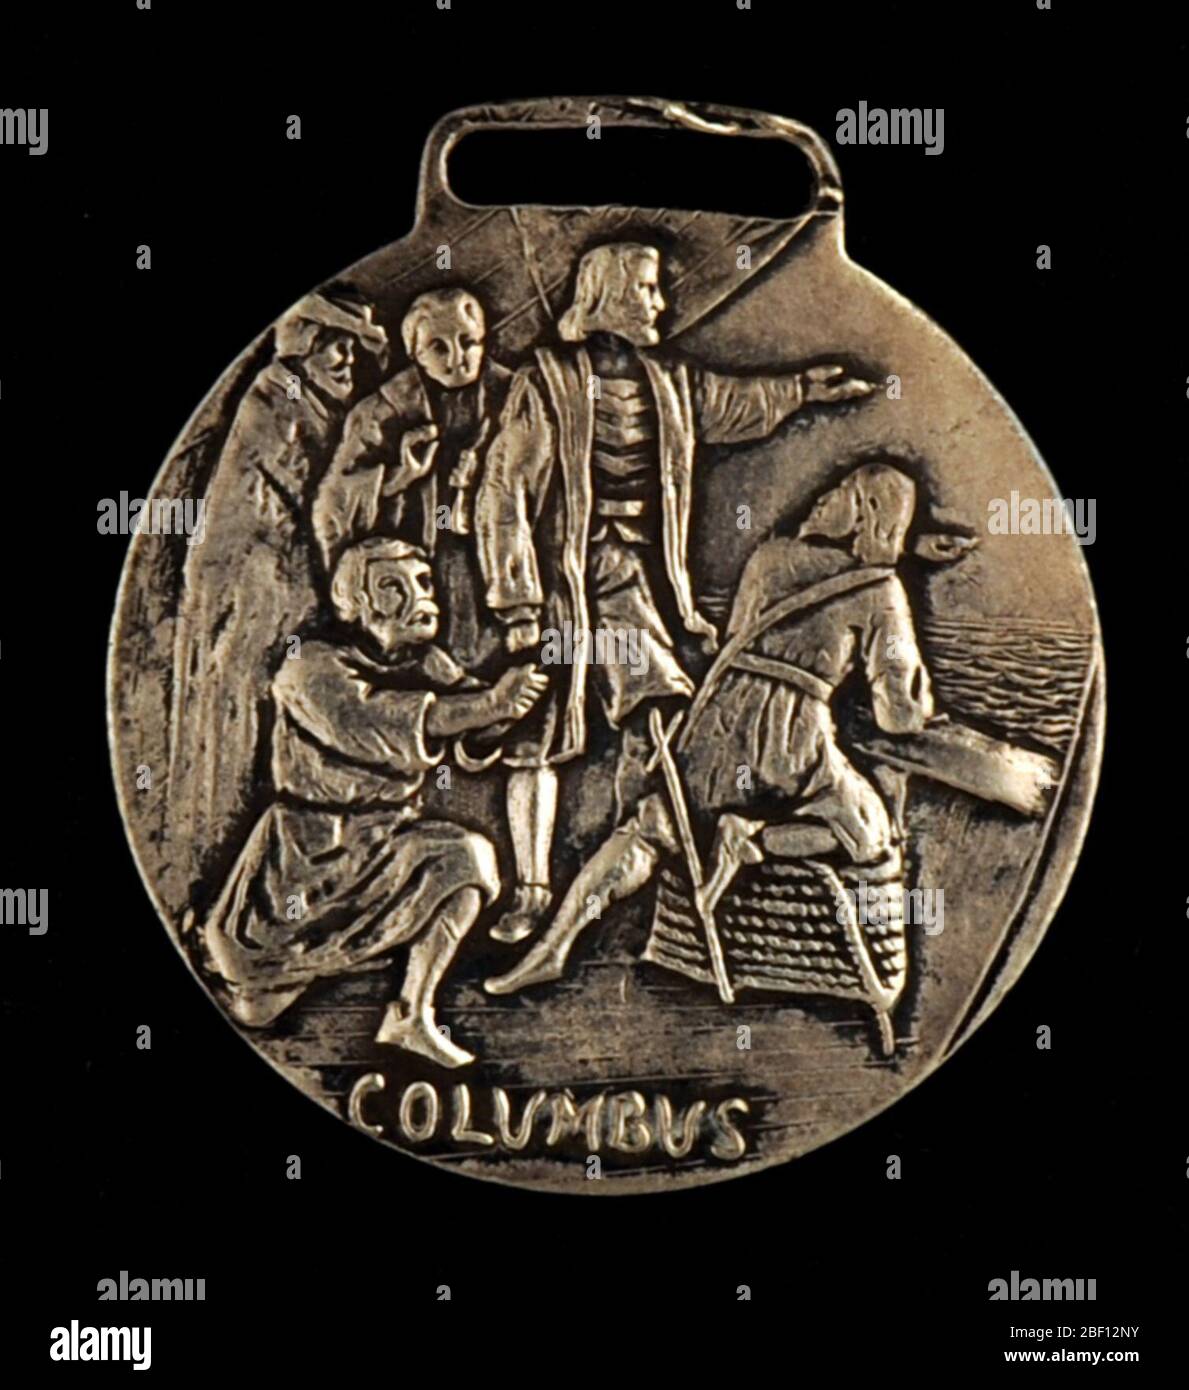 Columbian Exposition Owney tag. In 1893, Chicago, Illinois, was a major US railway hub and home to one of the largest, brassiest expositions in American history – the World’s Columbian Exposition. Thousands of people, and at least one dog, visited the fair from across the US and around the world. Stock Photo